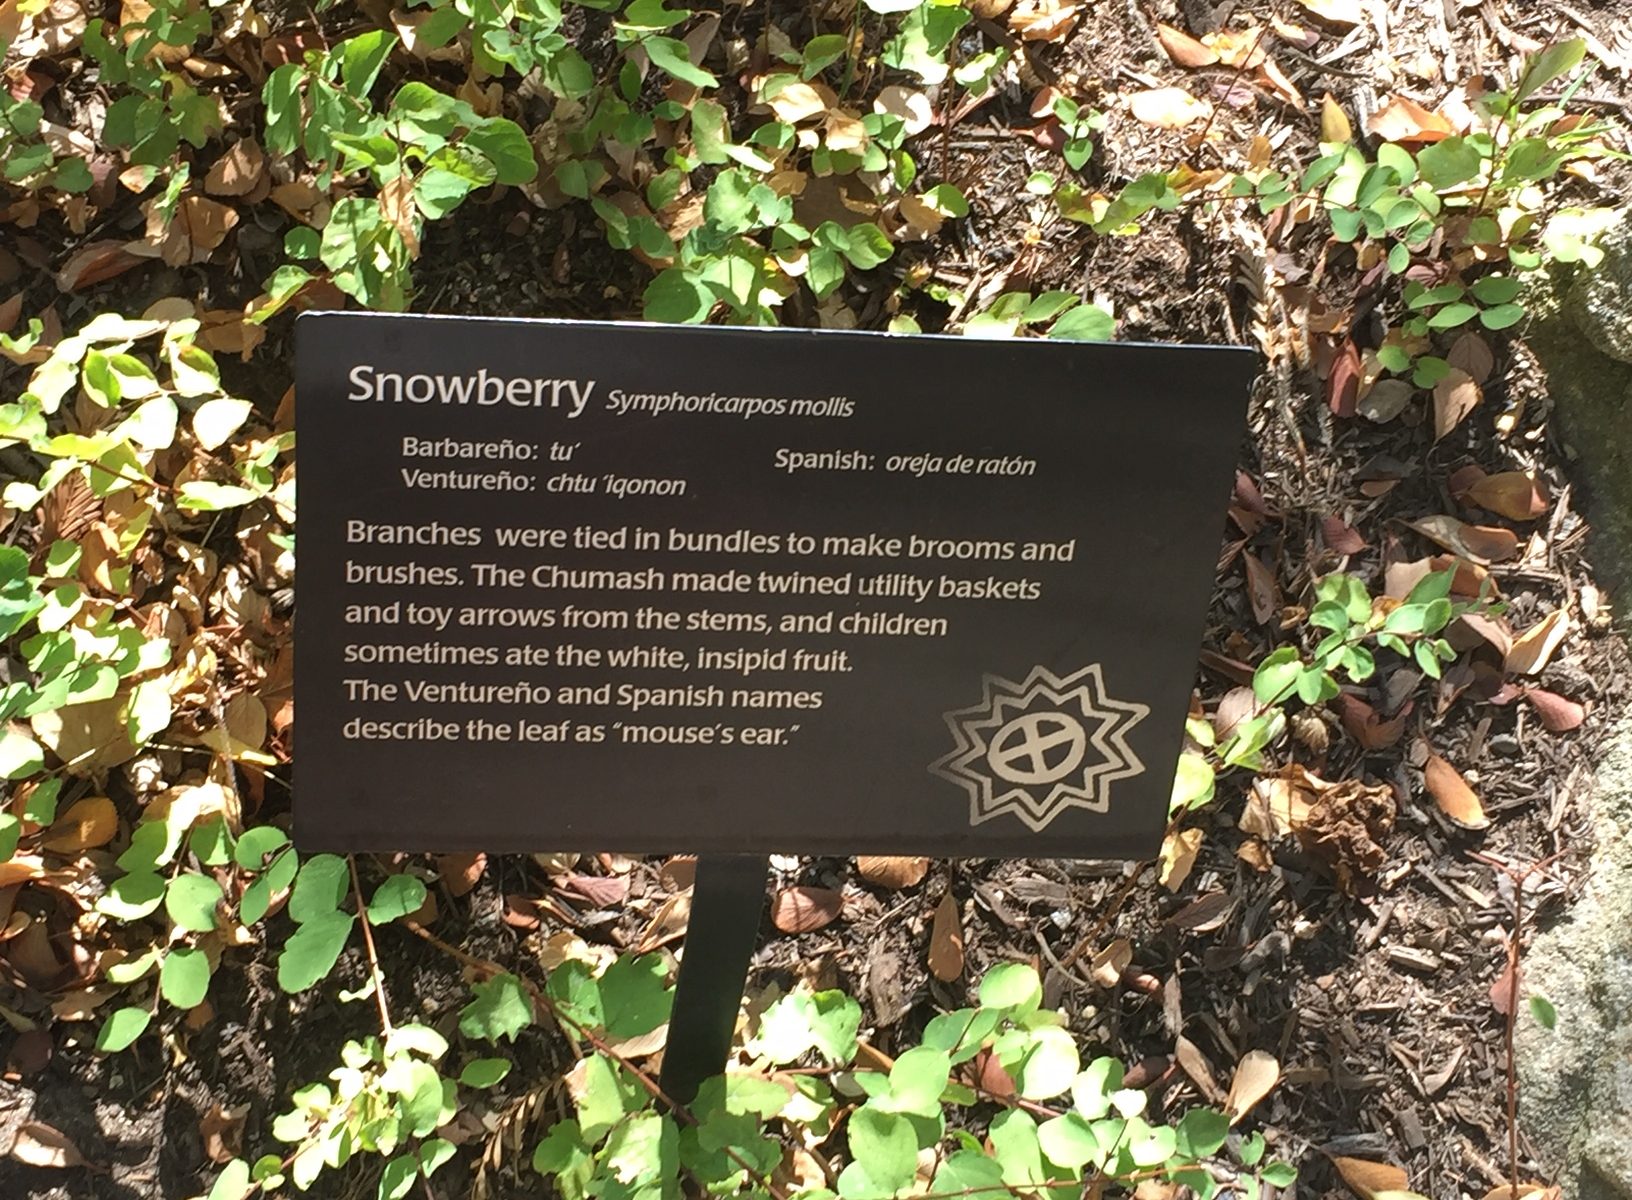 Snowberry plant label from the Suikinaik’oy Garden, featuring the English, Chumash, Latin and Spanish names of the plant and an English description of its use.